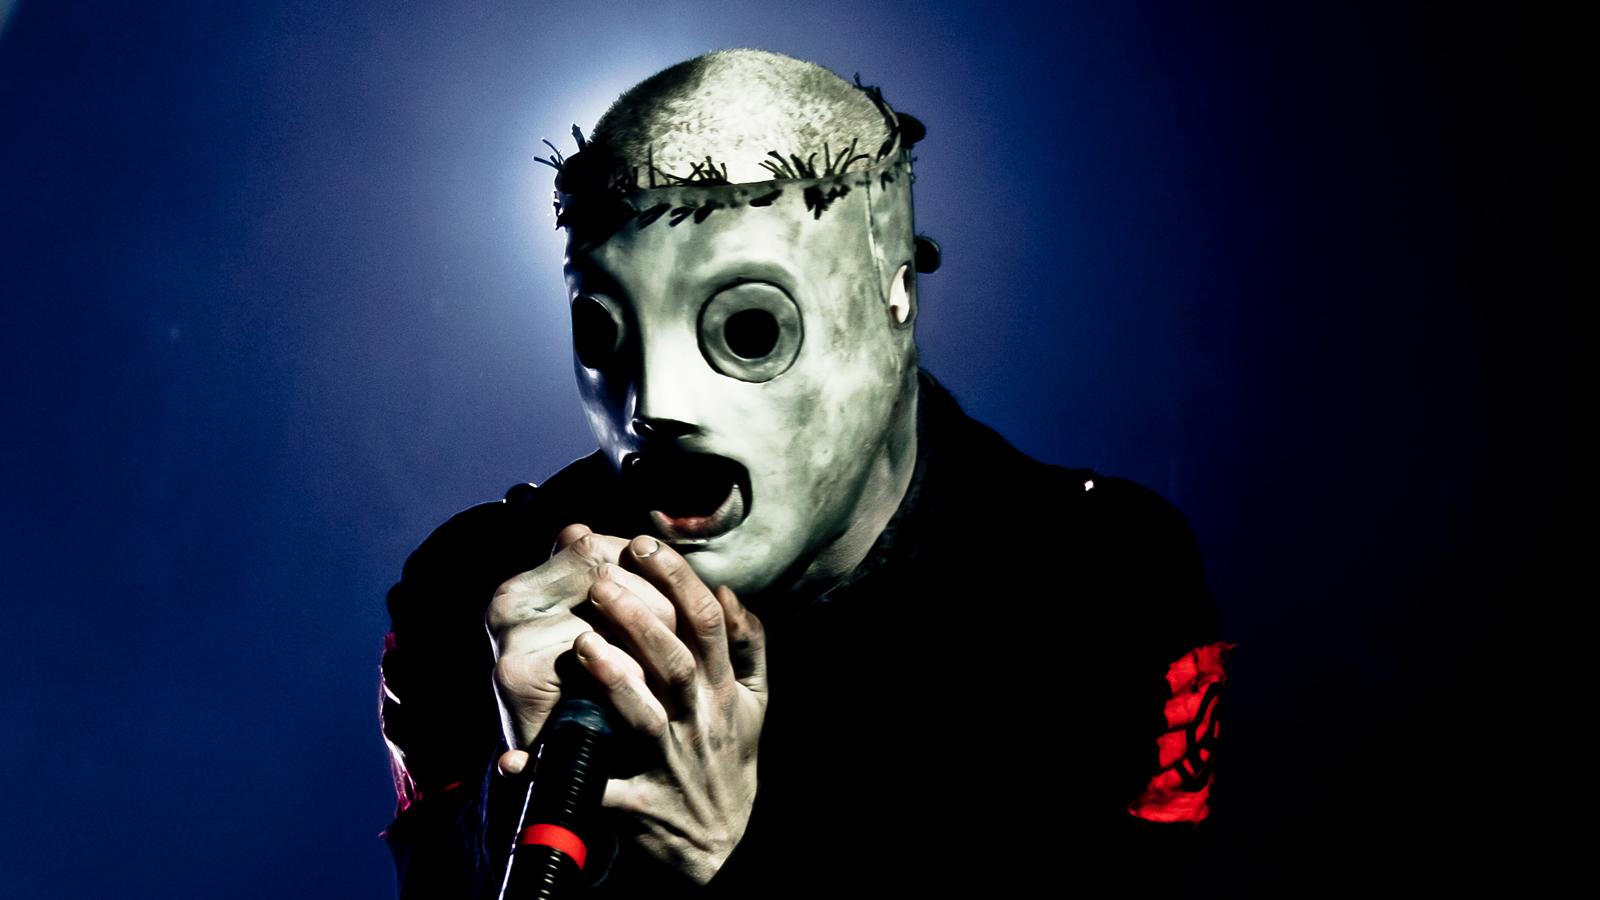 Slipknot's 'All Hope Is Gone': The Story of Defiance Behind Band's